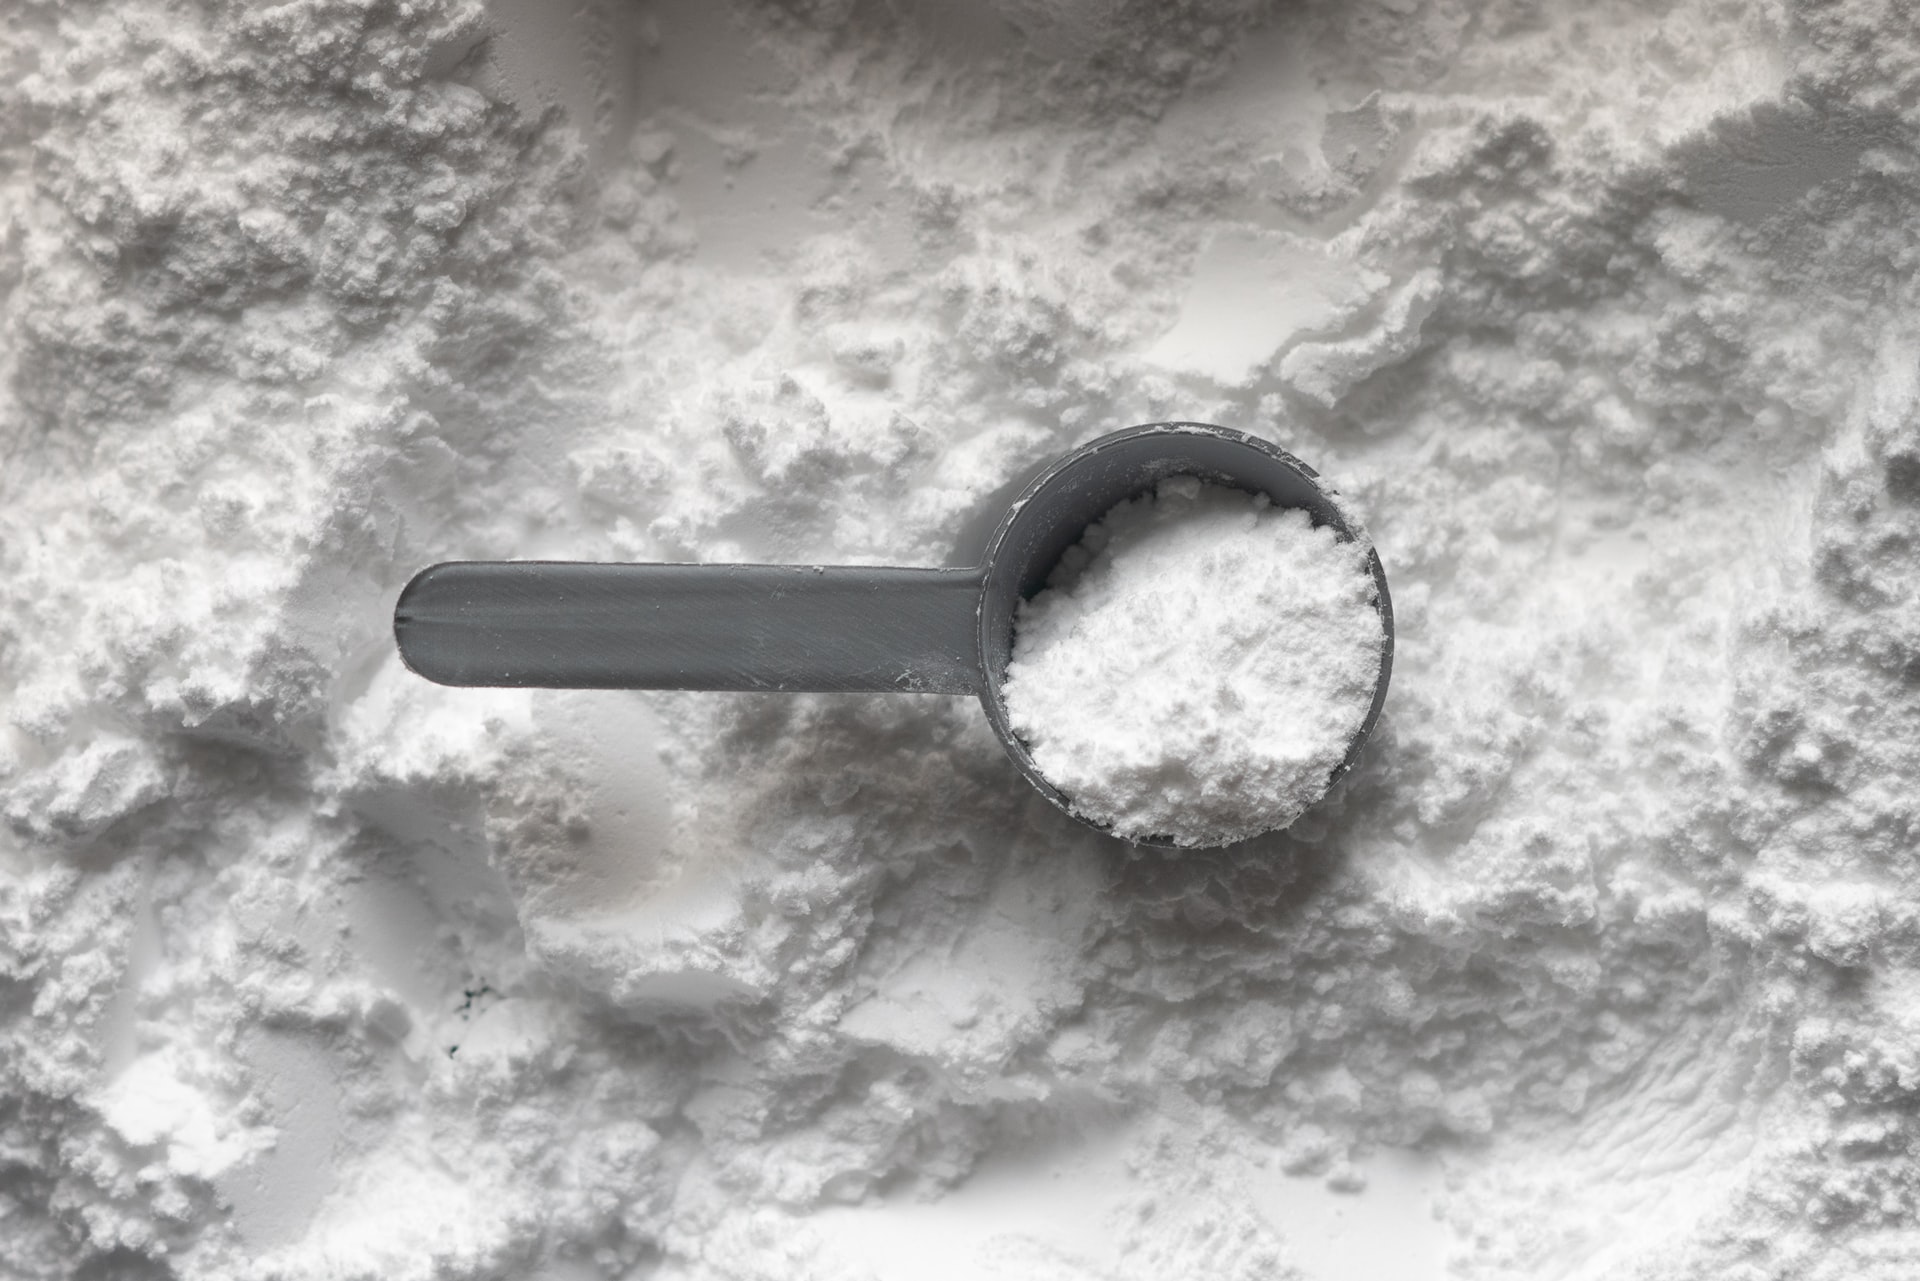 A plastic spoon filled with lactate powder sitting on a platform full of lactate powder